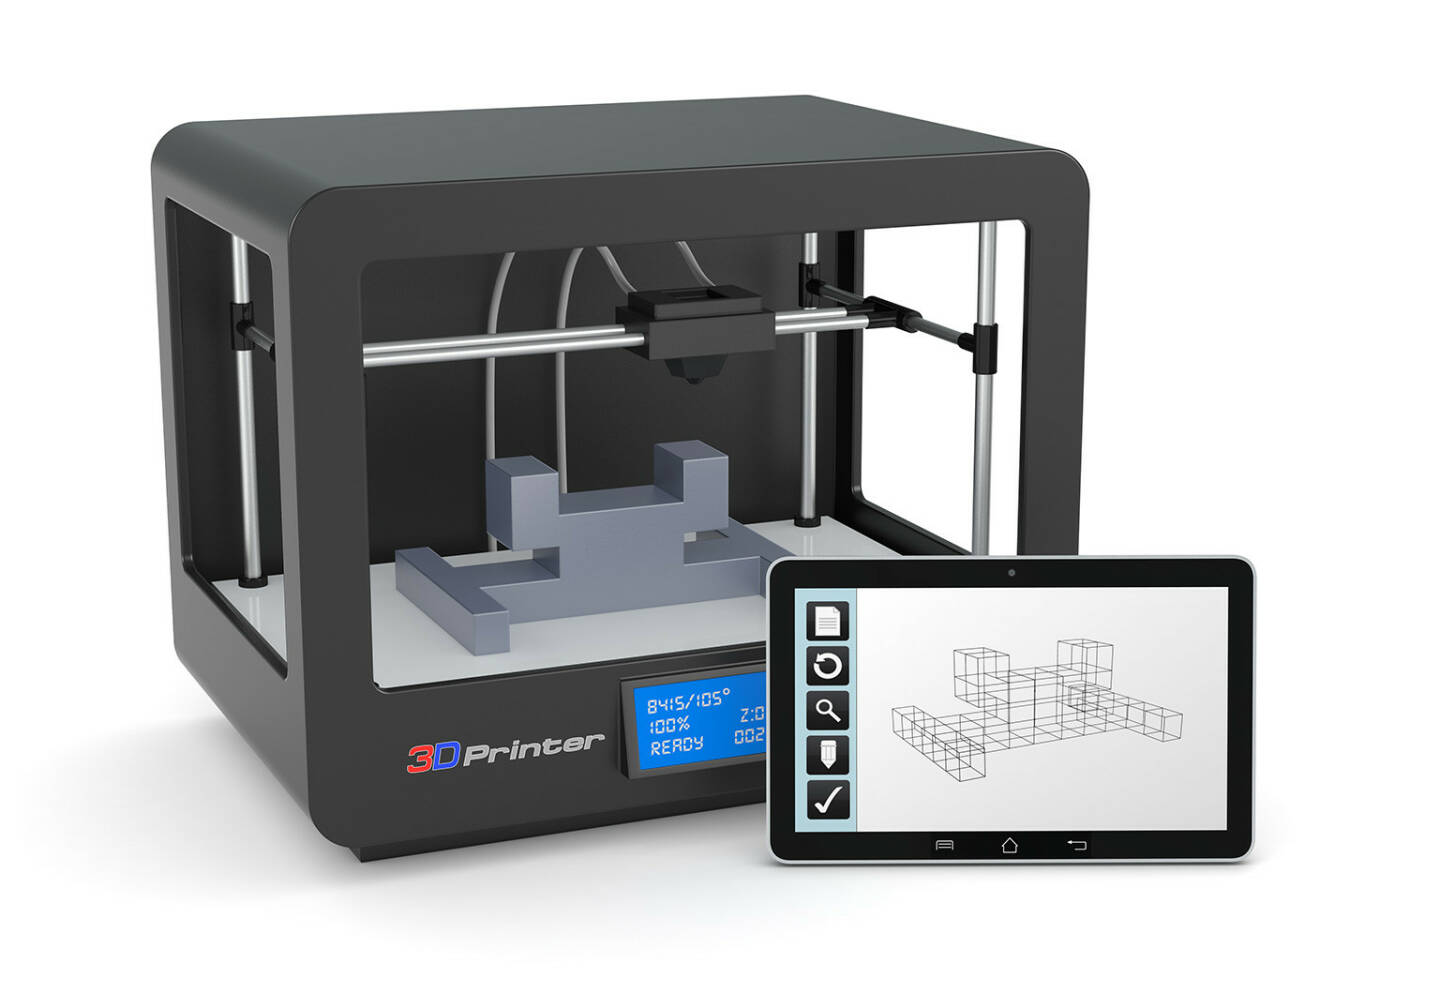 3D Drucker, 3D Technologie, Tablet, CAD Software http://www.shutterstock.com/de/pic-175520168/stock-photo-one-d-printer-with-a-tablet-pc-and-a-cad-software-render.html